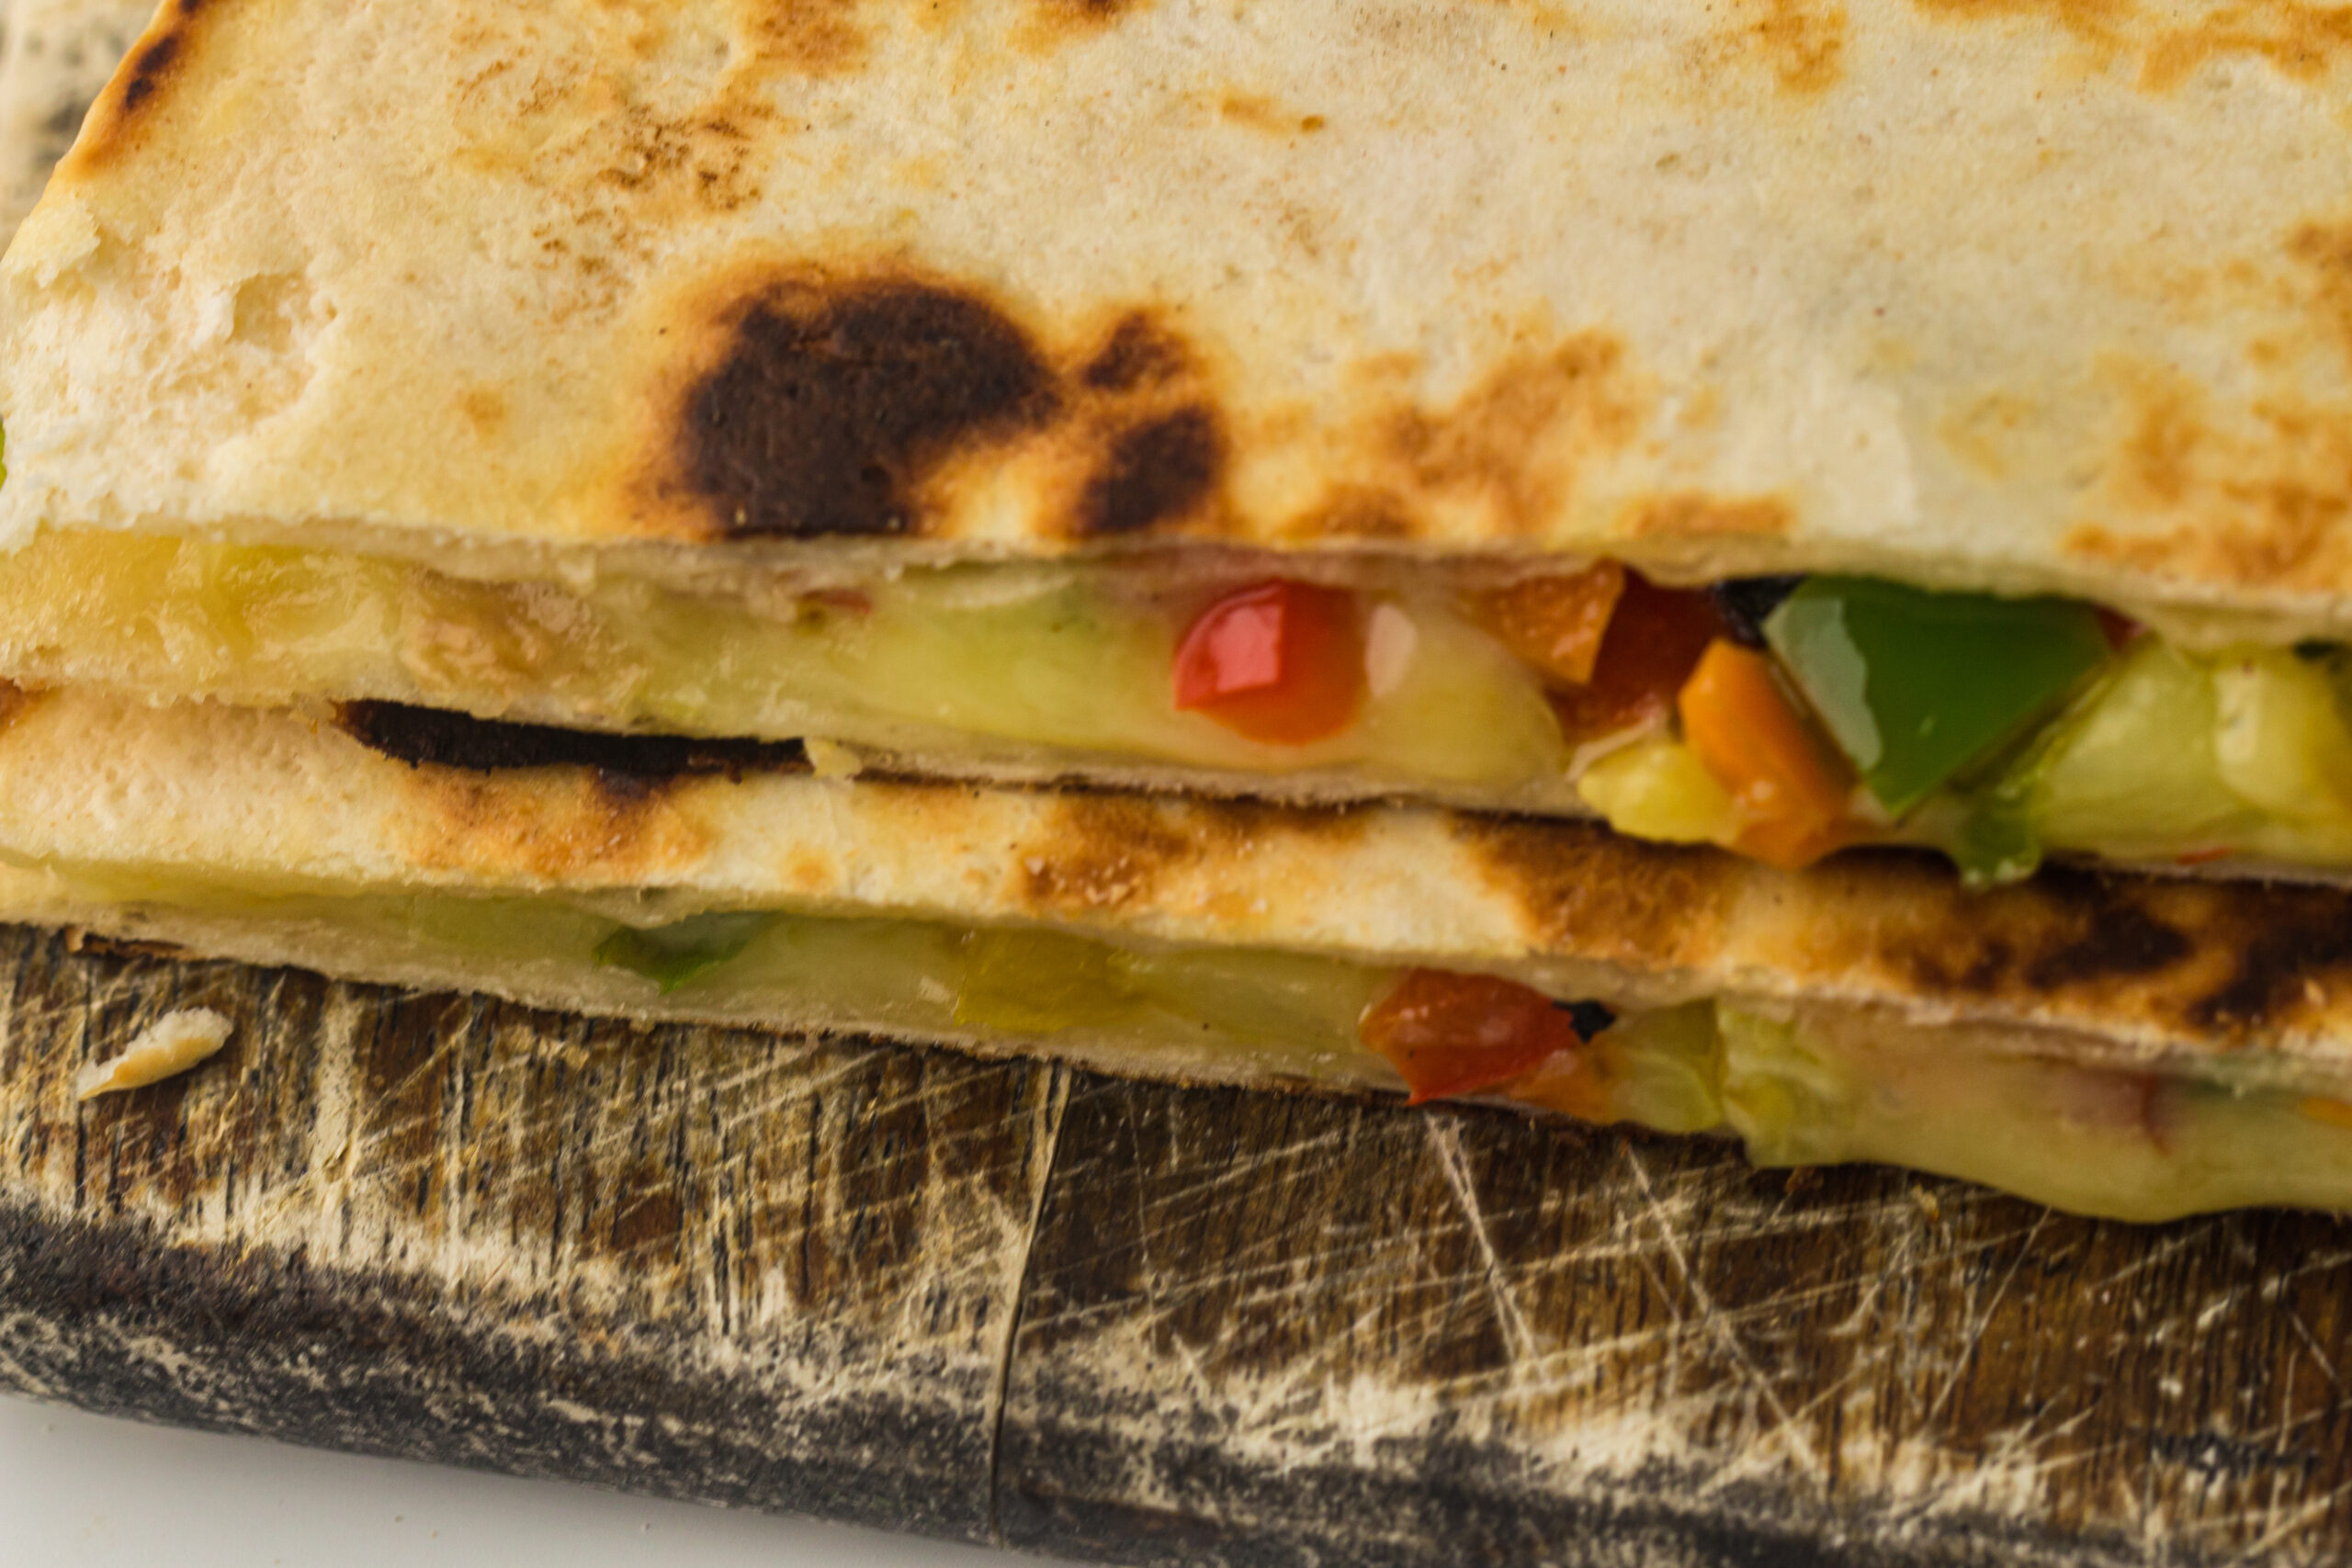 Cheesy and Colorful Vegetable Quesadilla: A Burst of Flavor